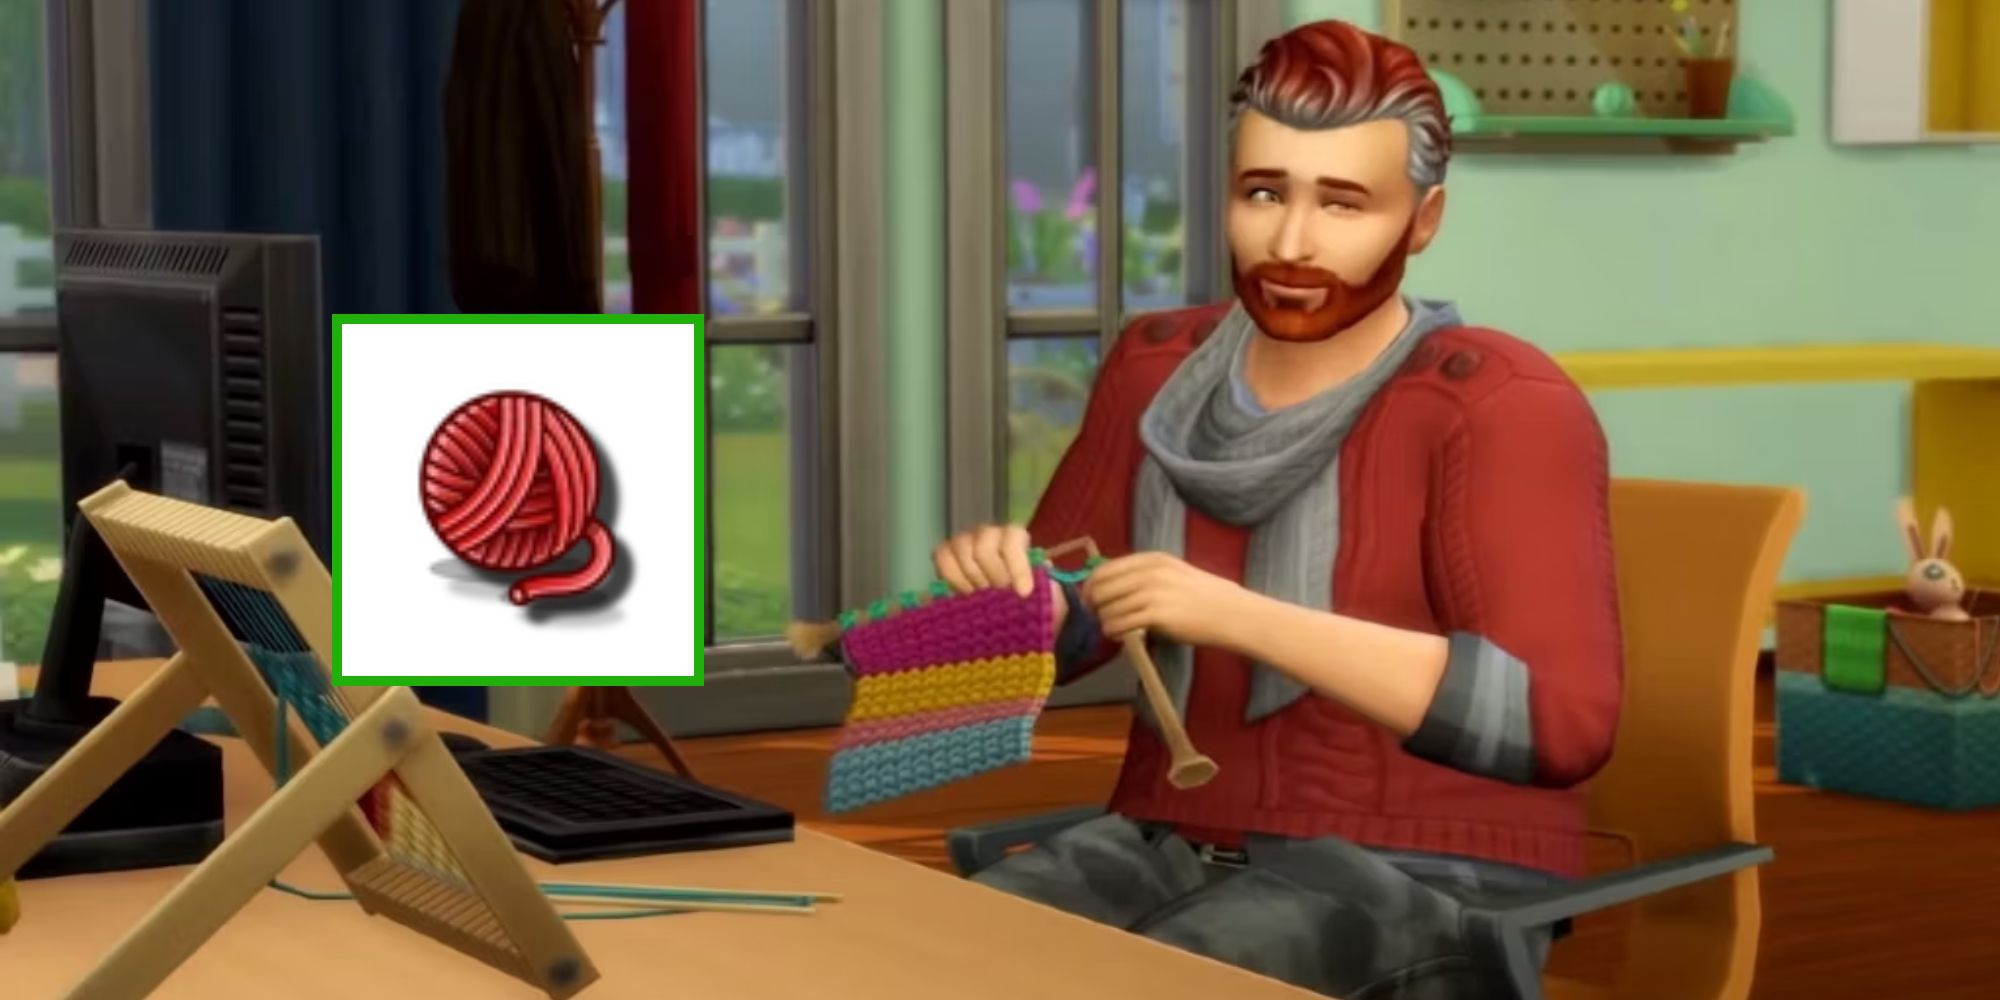 A Sim is knitting something and the knitting skill icon is added to the photo